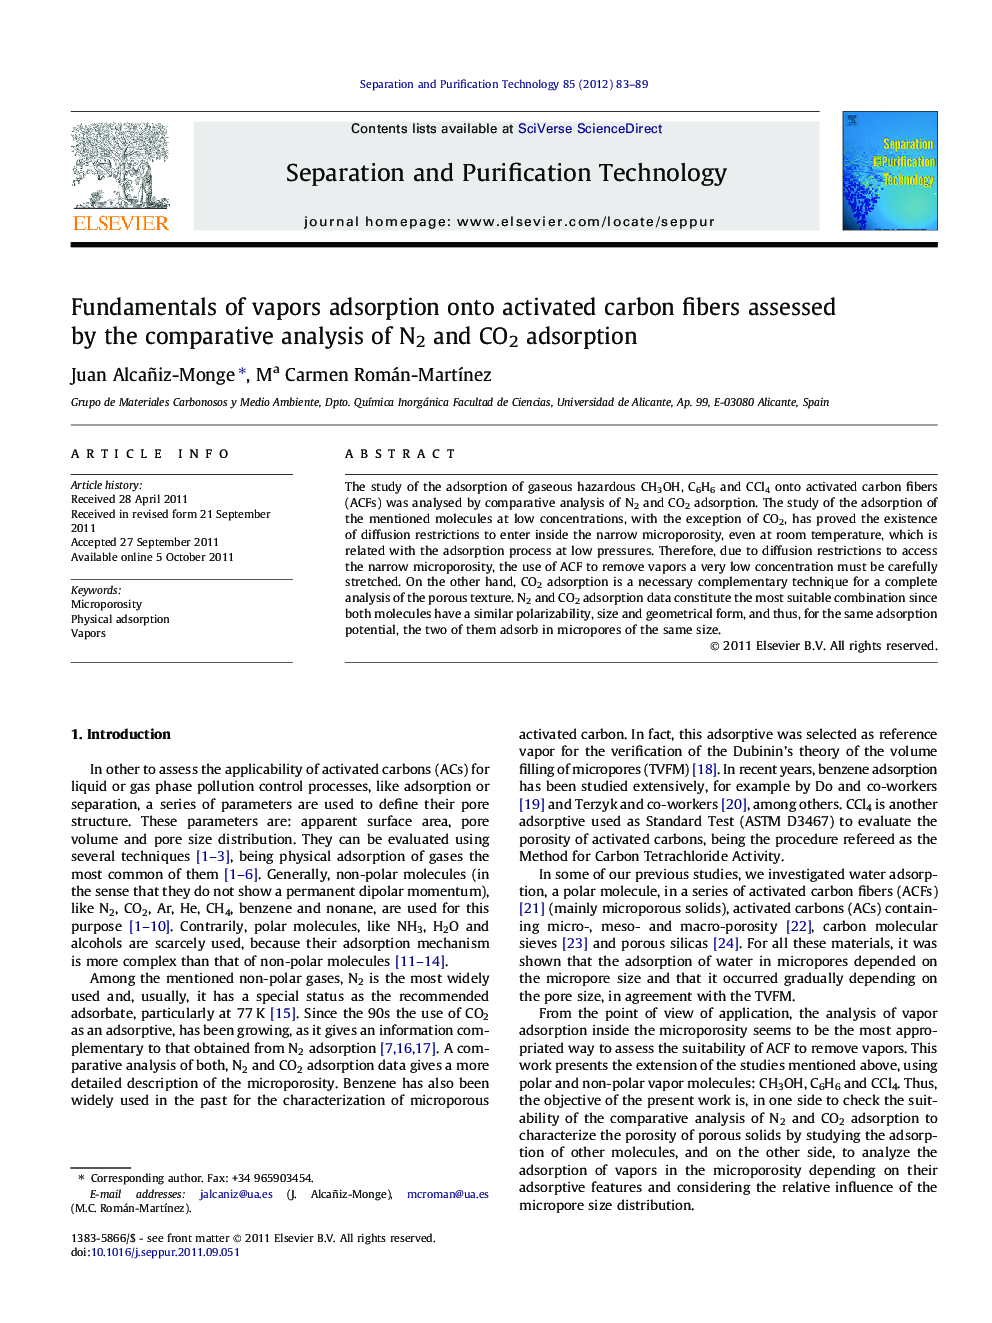 Fundamentals of vapors adsorption onto activated carbon fibers assessed by the comparative analysis of N2 and CO2 adsorption